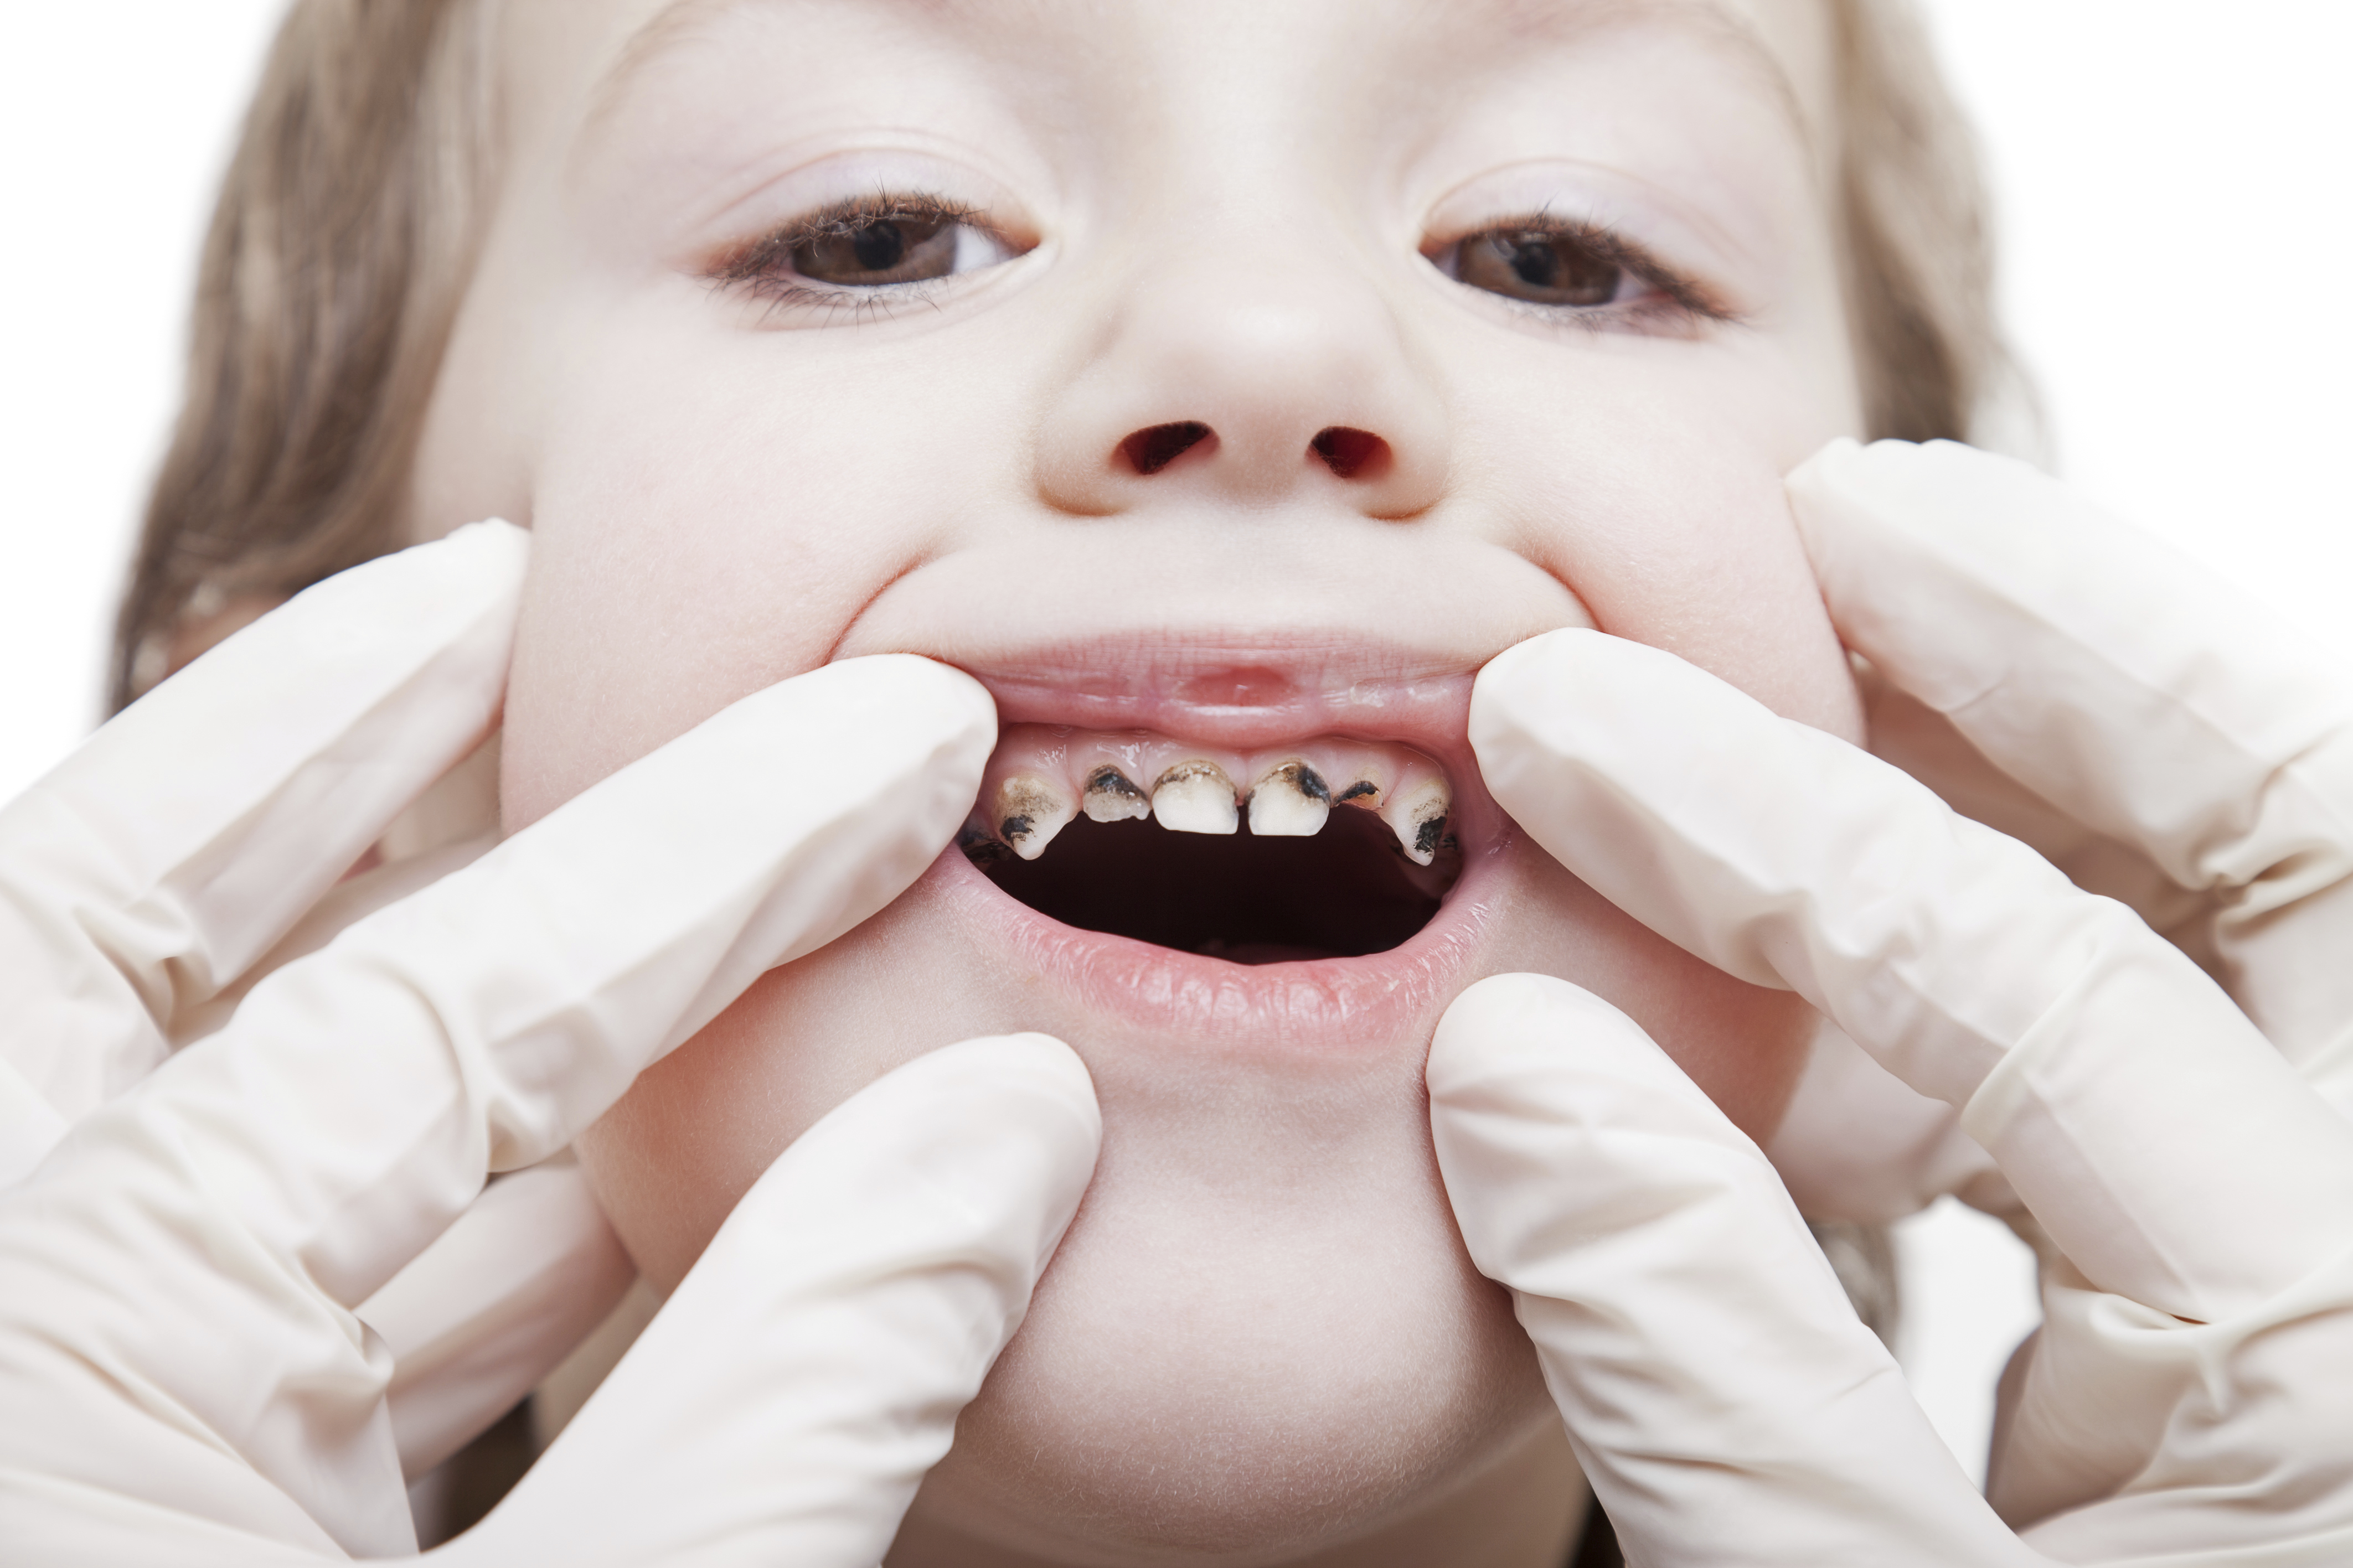 Dundee remains one of the worst places in Scotland in terms of childhood teeth decay